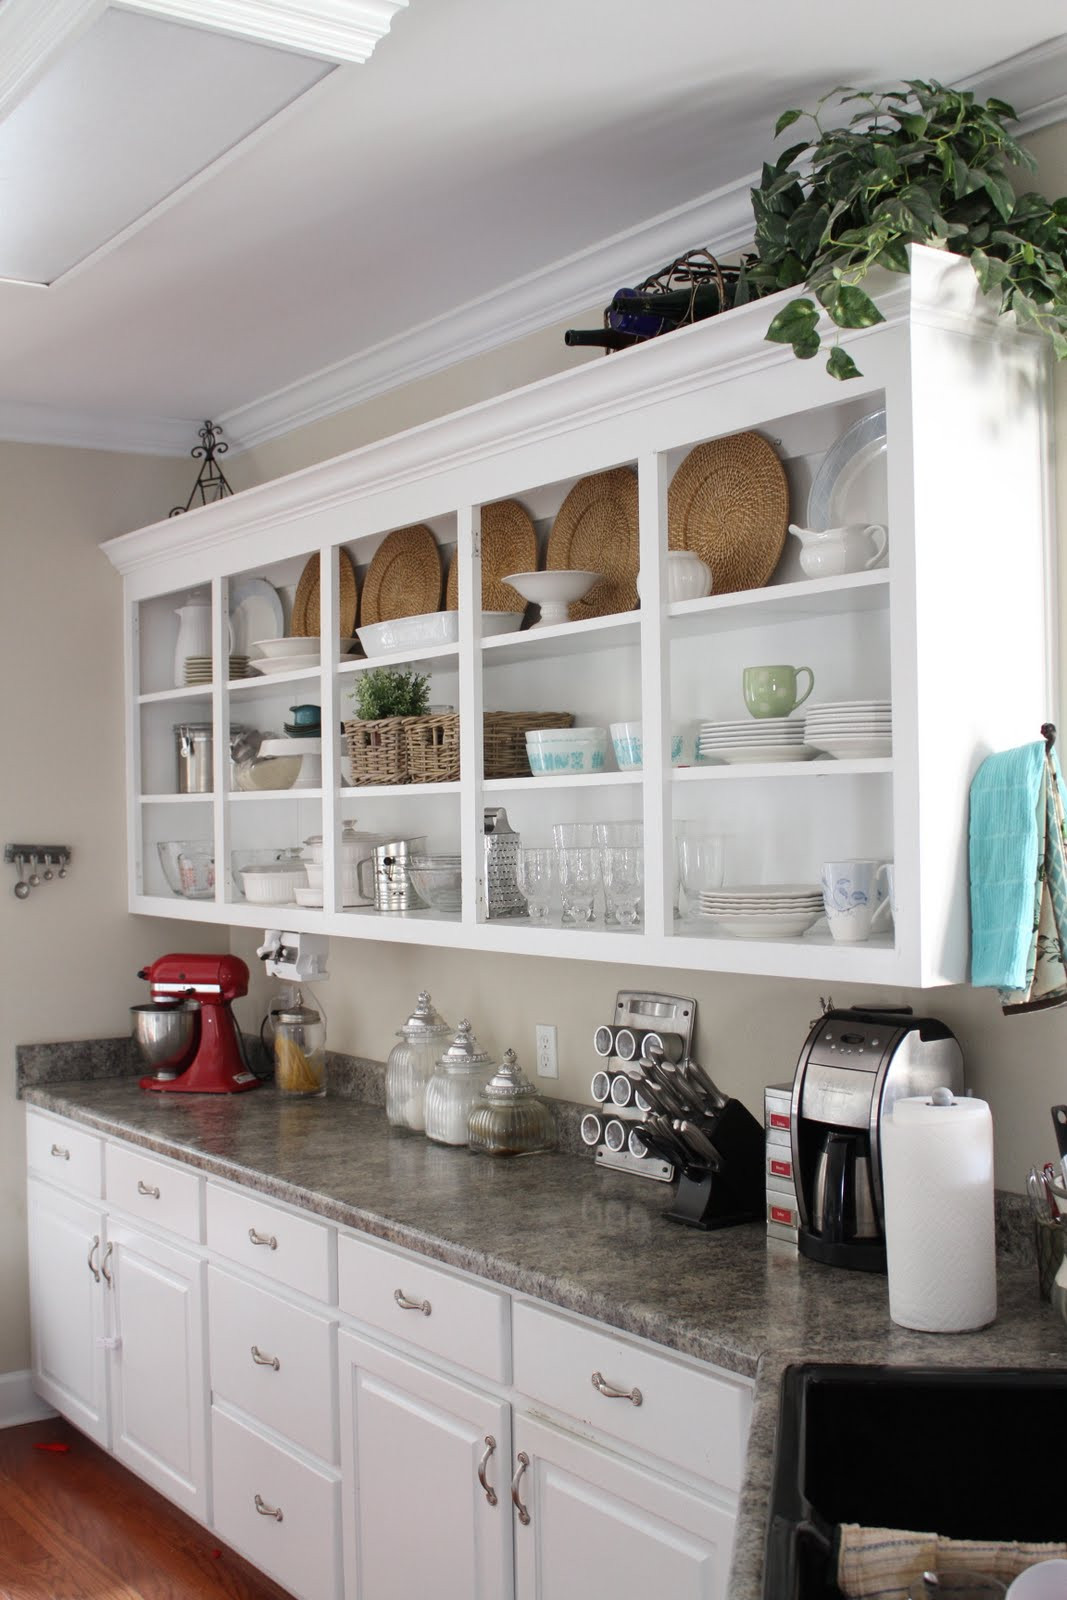 Kitchen Wall Shelving Units
 Kitchen Inspiration Swoon Worthy Open Shelving Swoon Worthy